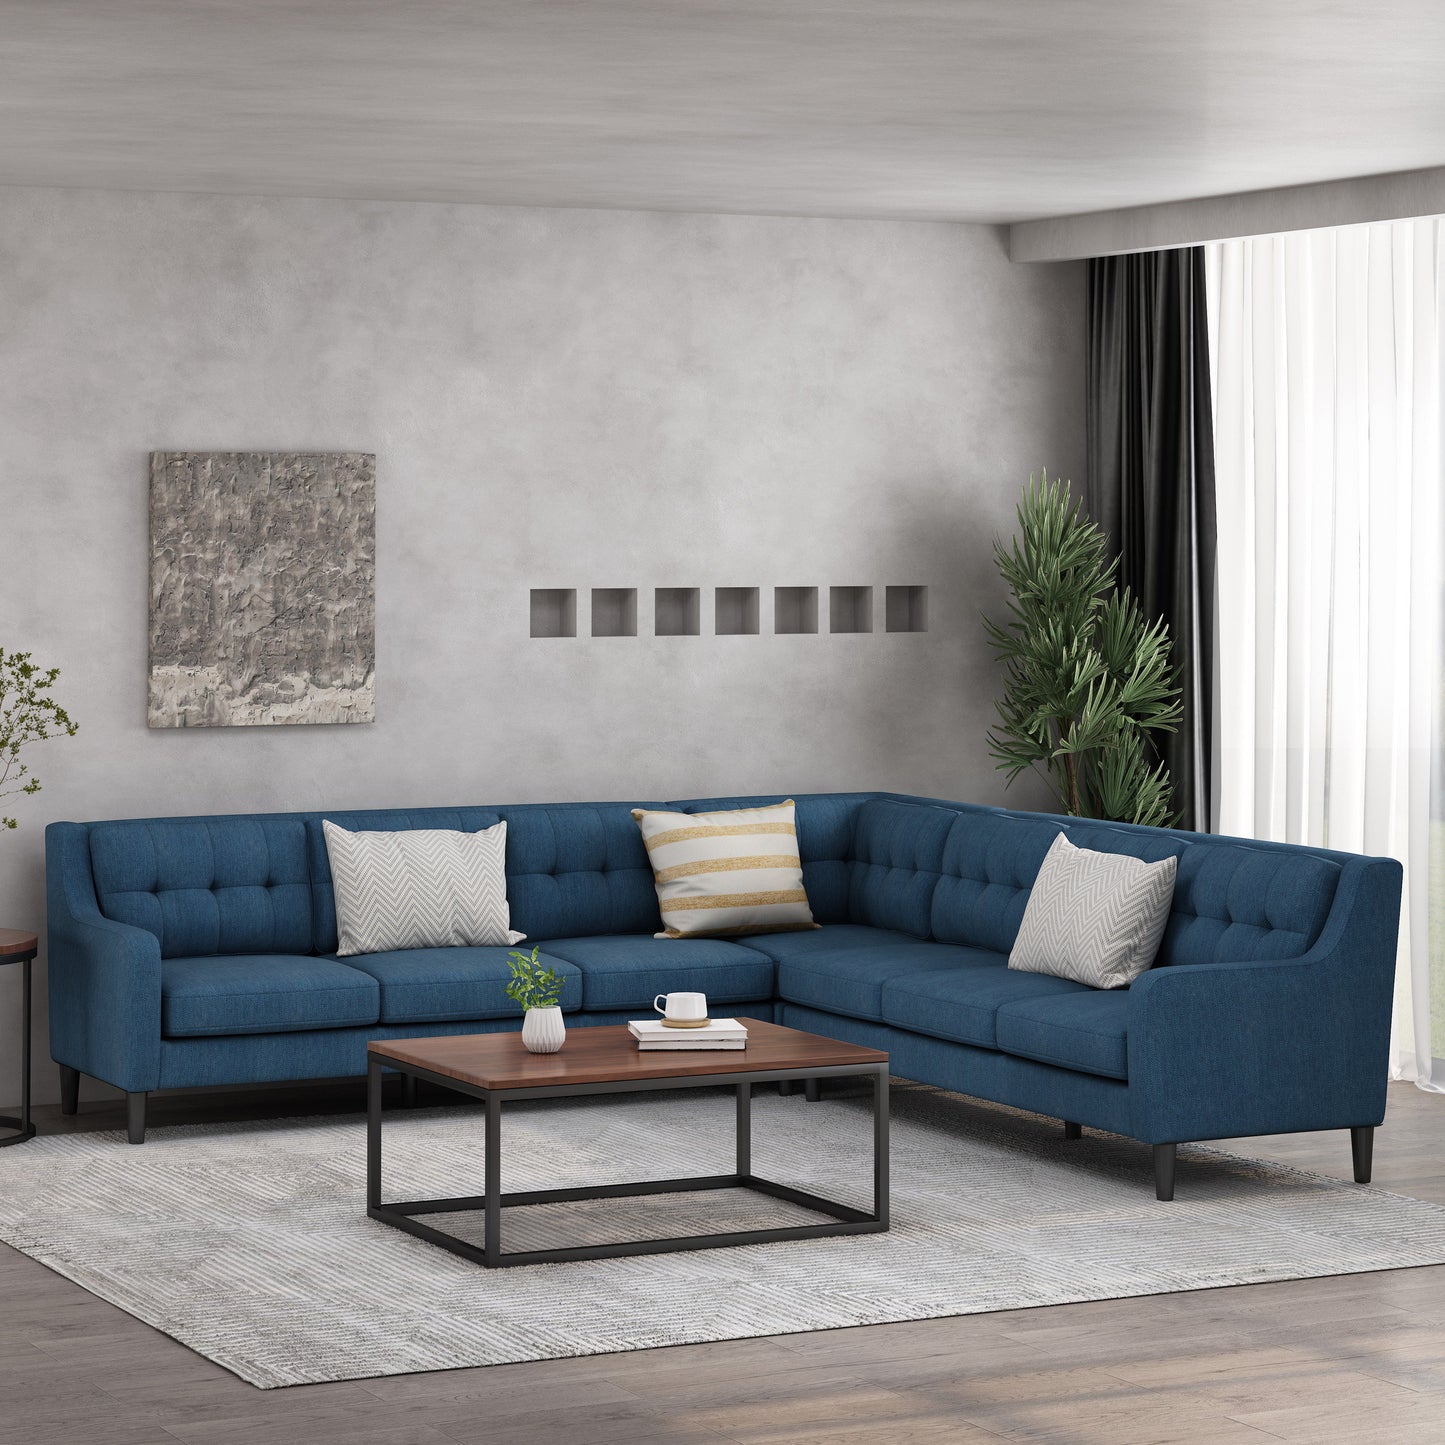 McCone Contemporary Tufted Fabric 7 Seater Sectional Sofa Set